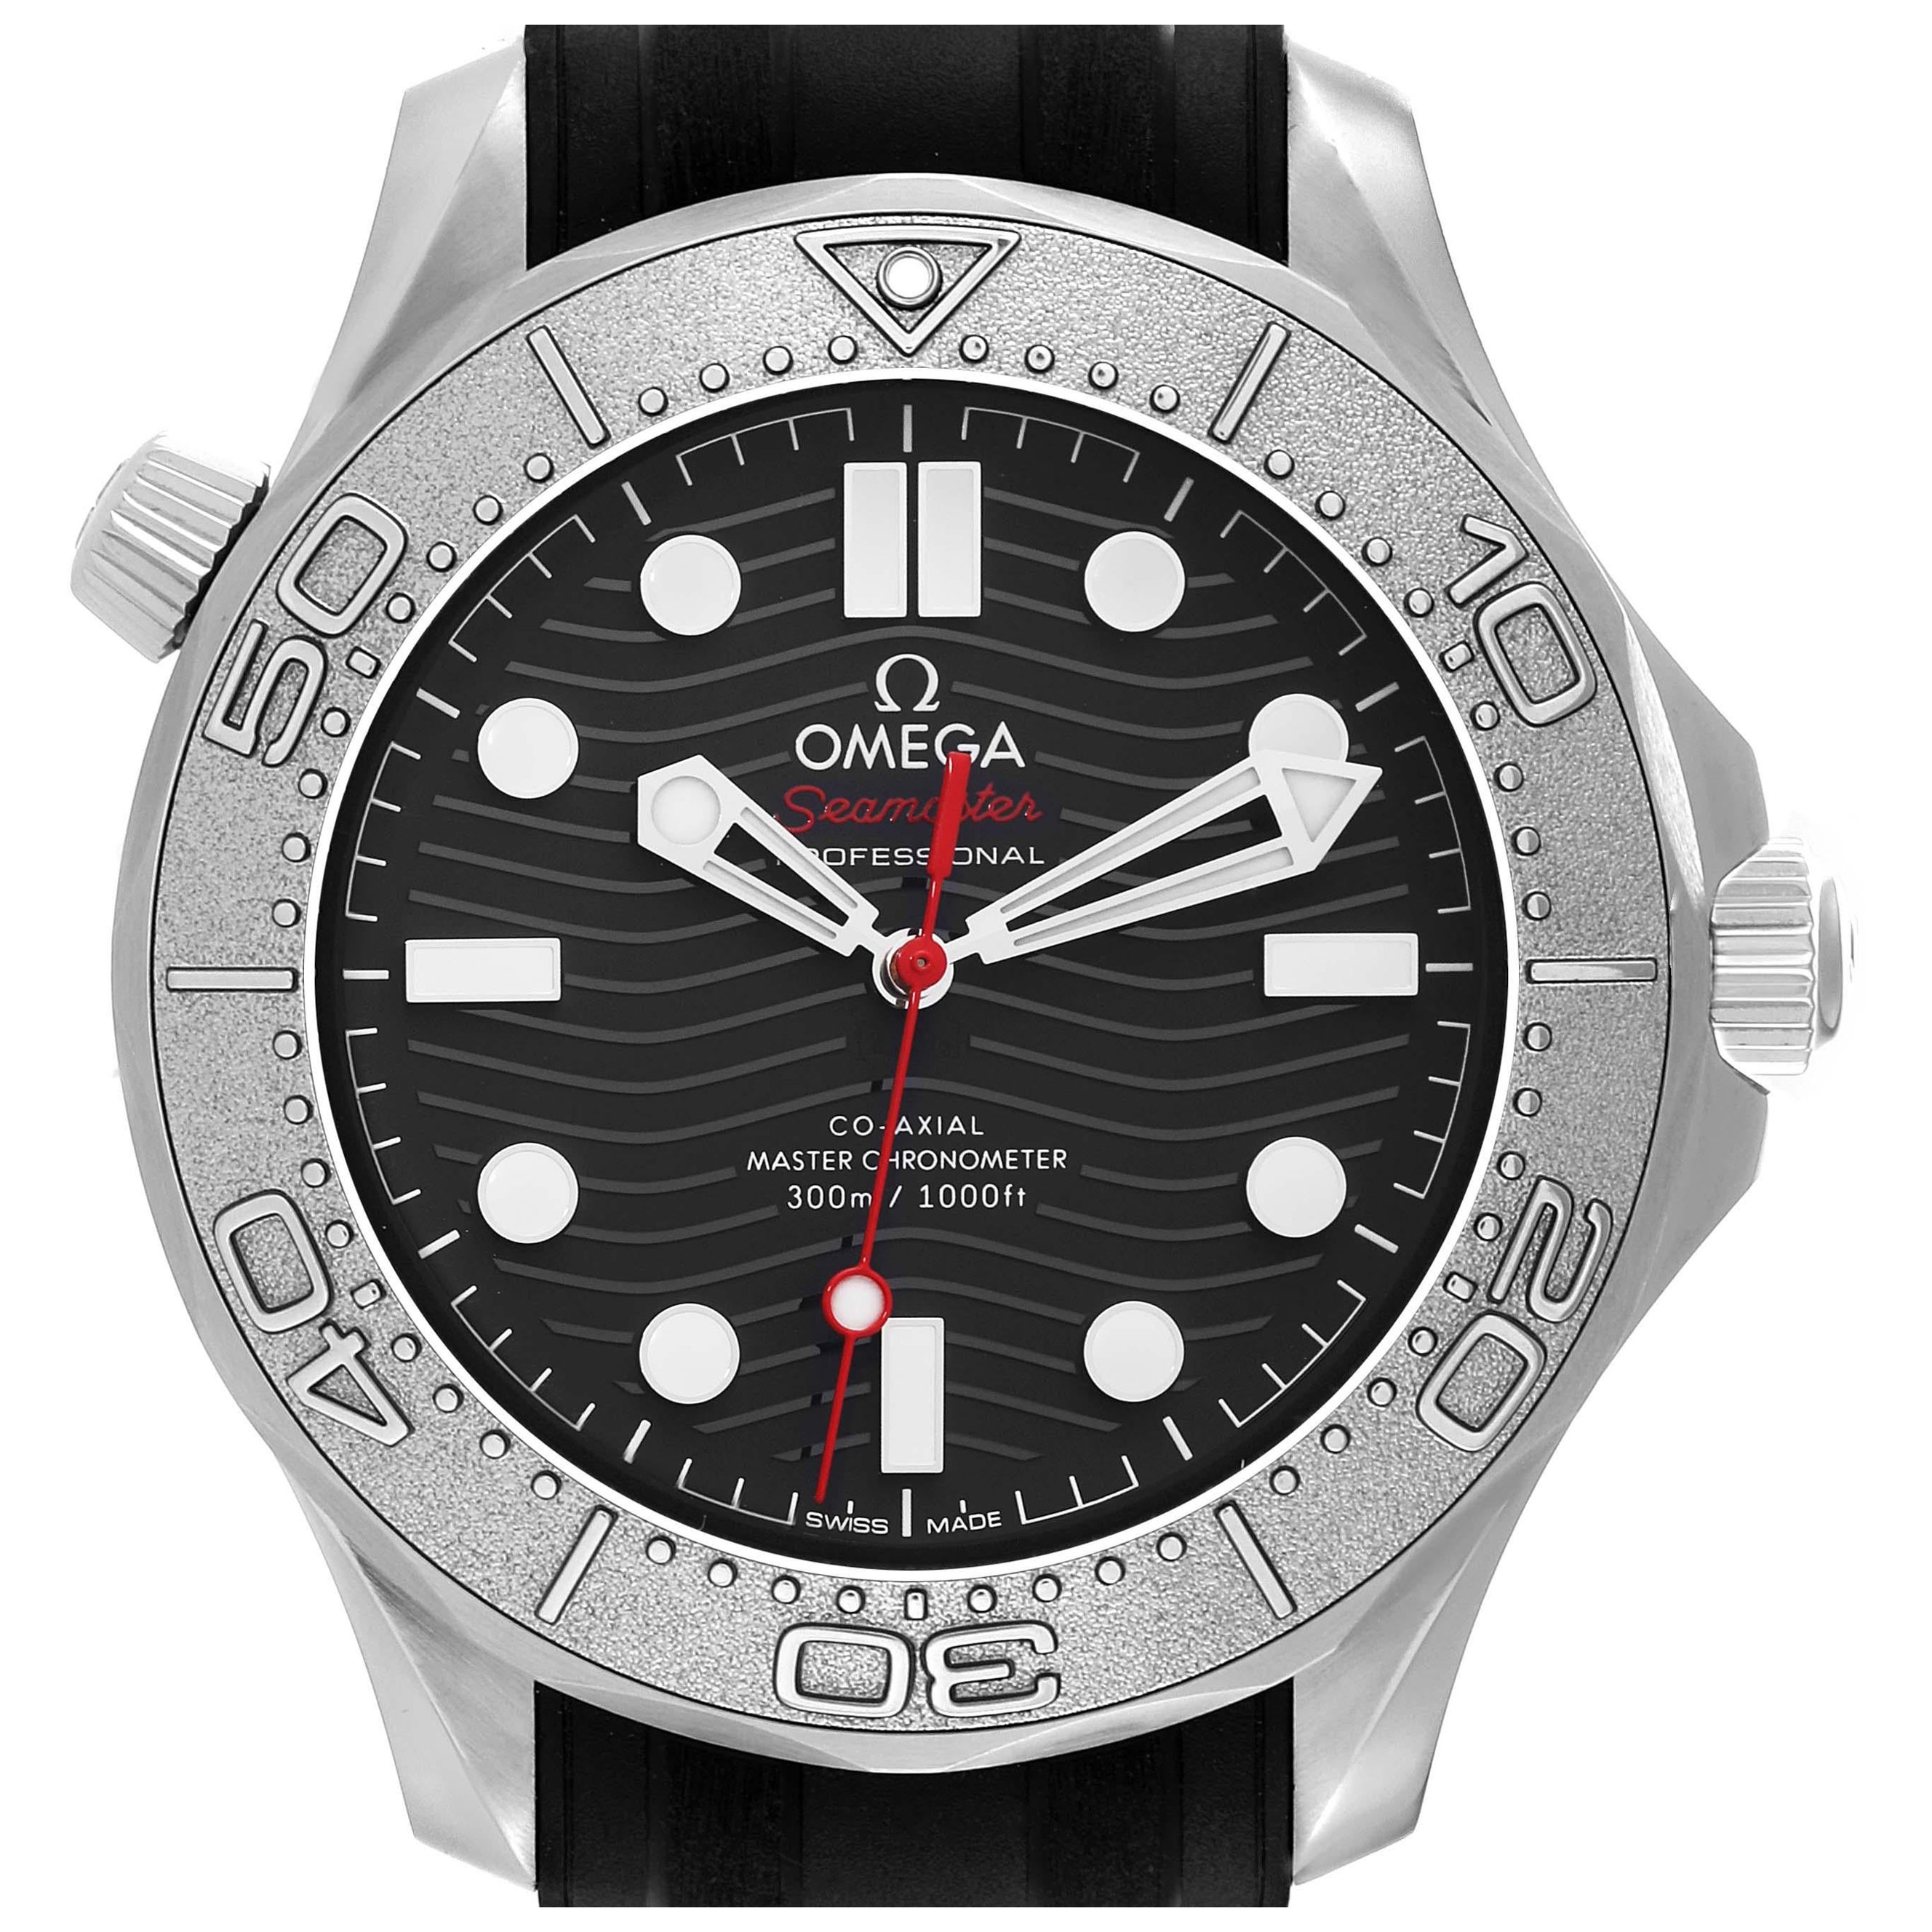 Omega Seamaster Diver Nekton Edition Steel Mens Watch 210.32.42.20.01.002 For Sale